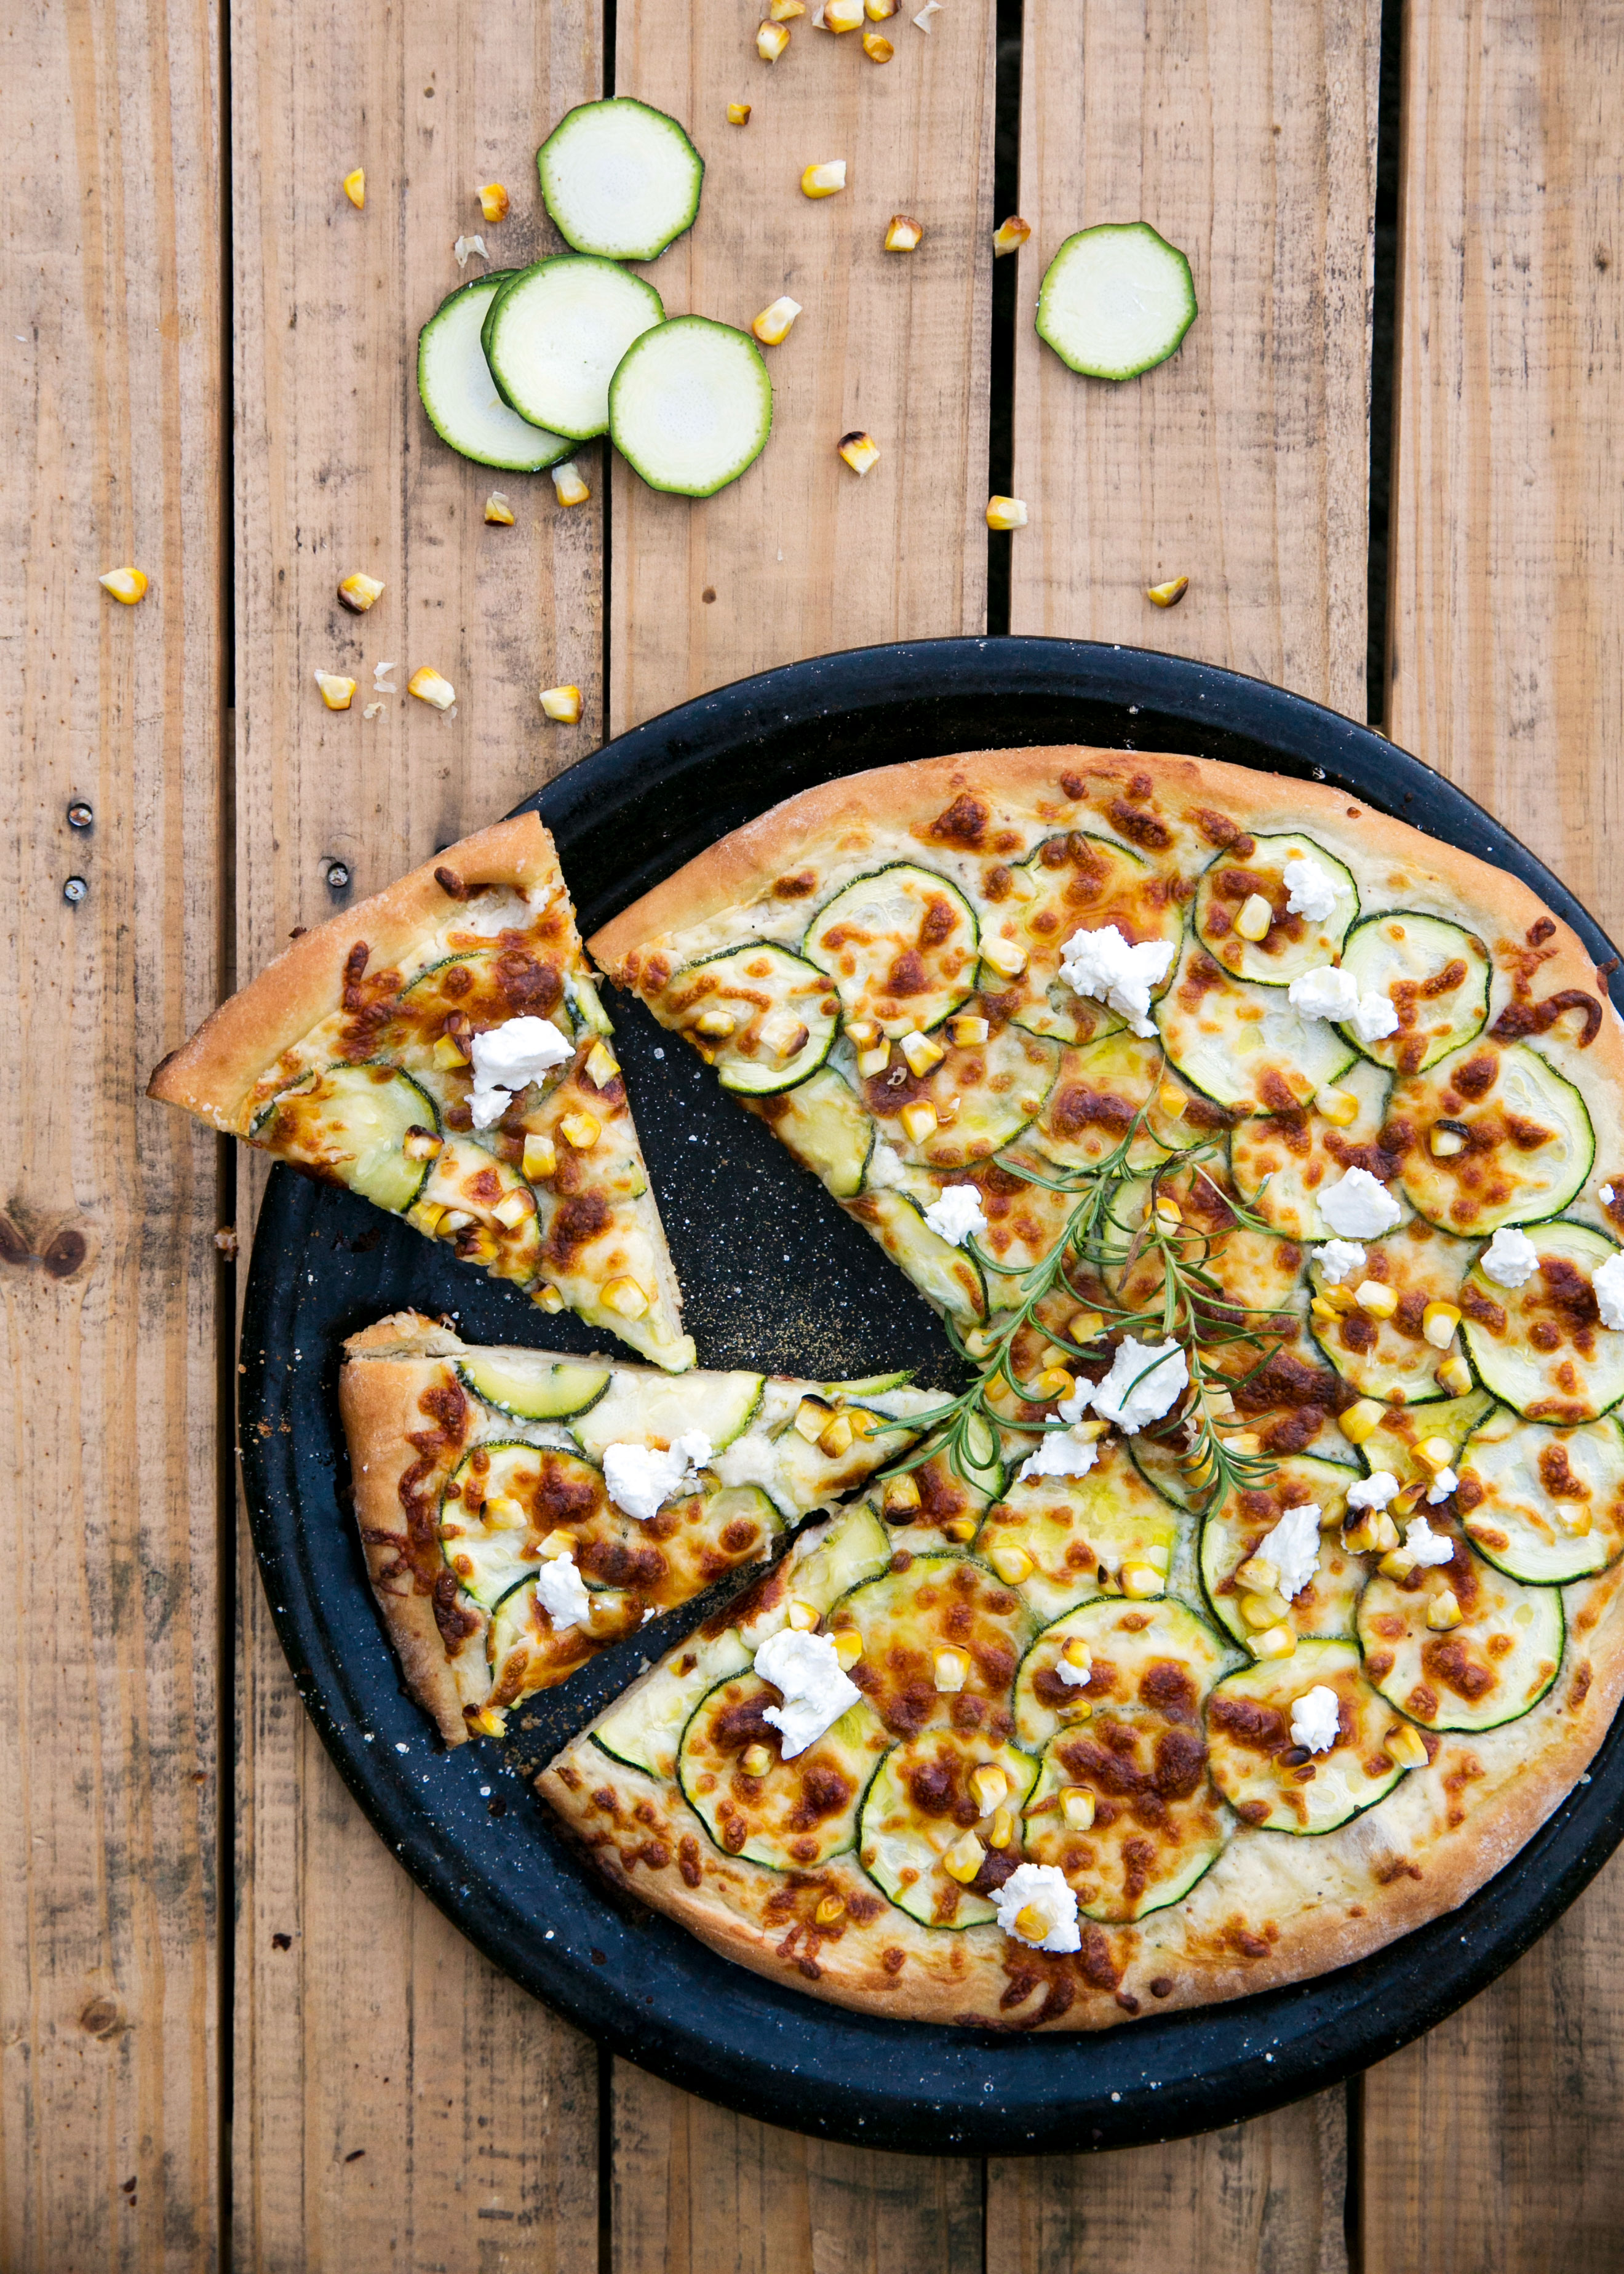 Top Your Pizza with Roasted Corn and Zucchini